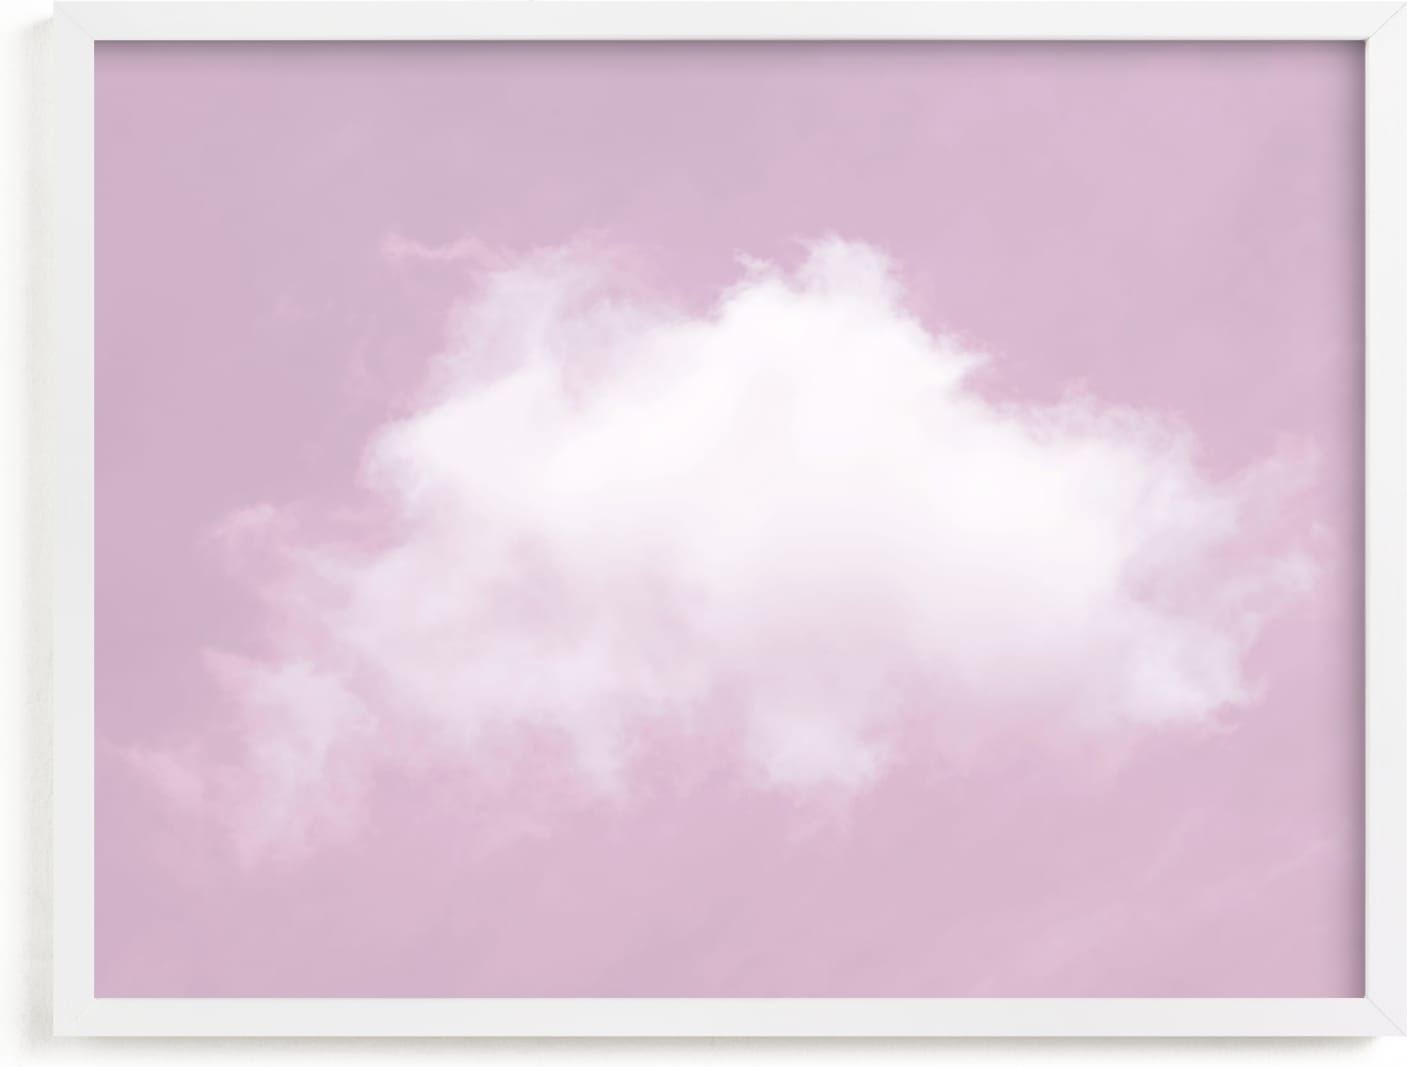 This is a purple art by Tania Medeiros called Cloud in the Sky.